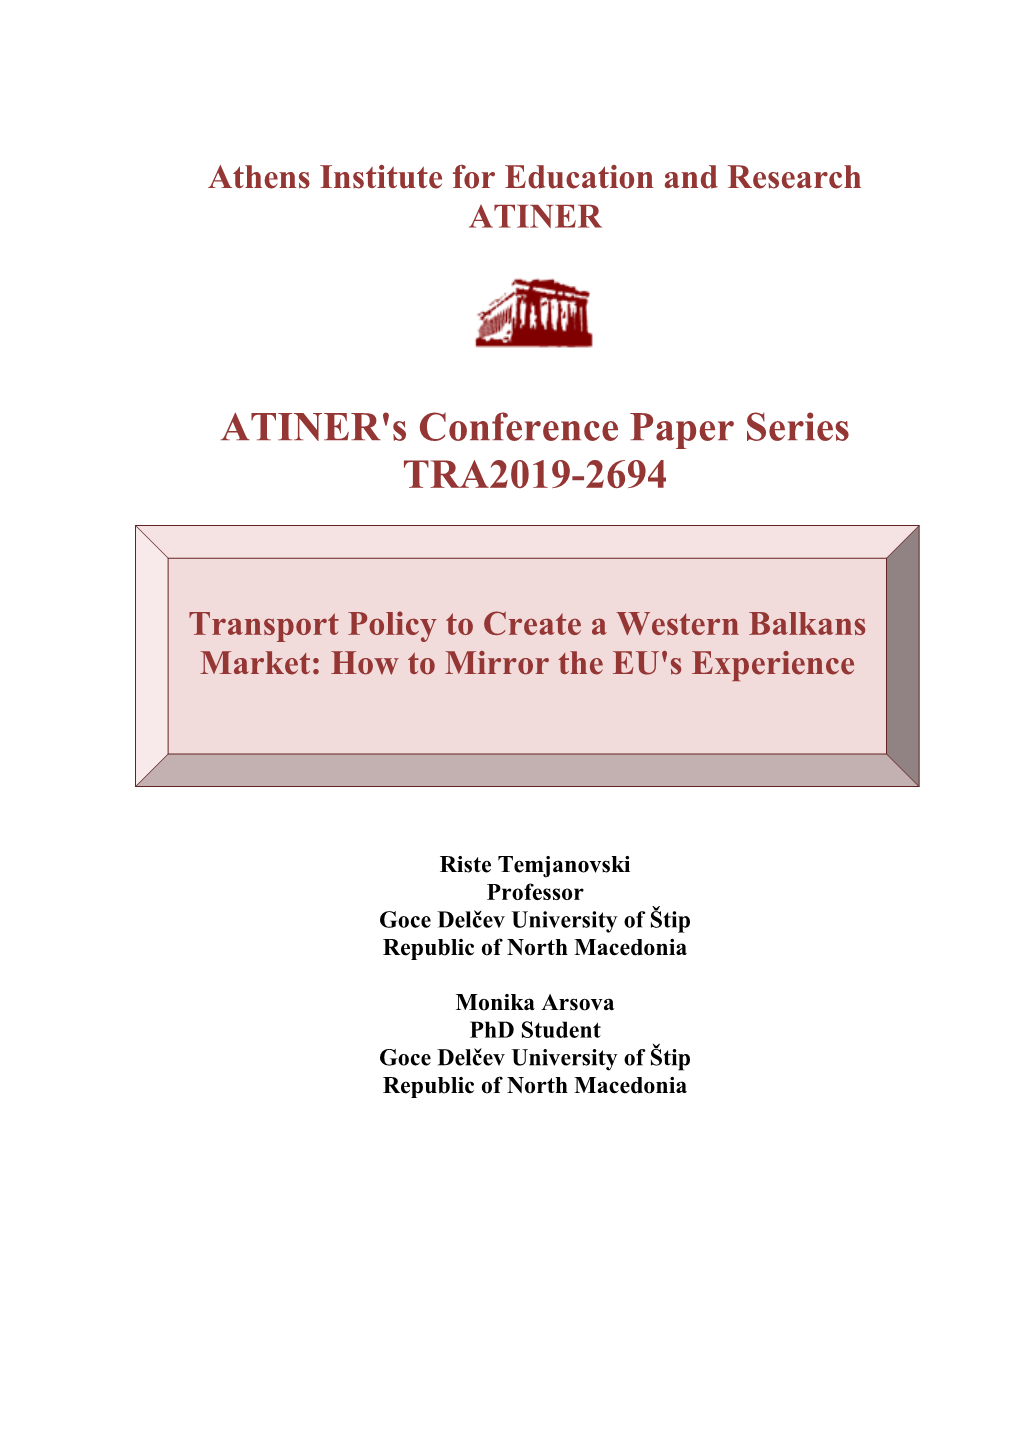 ATINER's Conference Paper Series TRA2019-2694